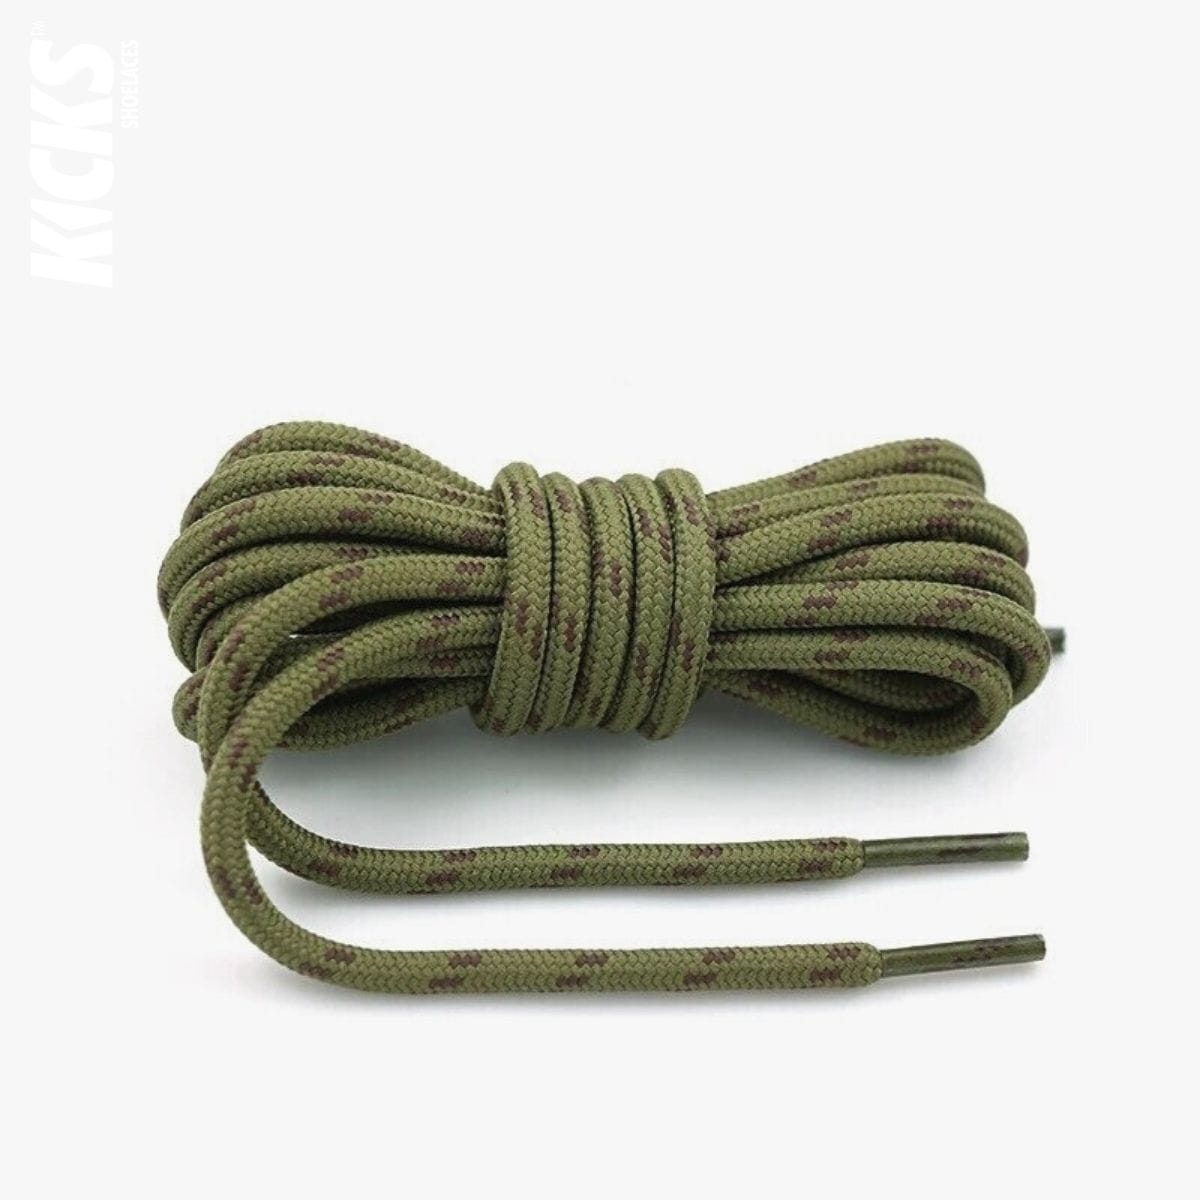 trekking-shoe-laces-united-states-in-army-green-and-brown-shop-online